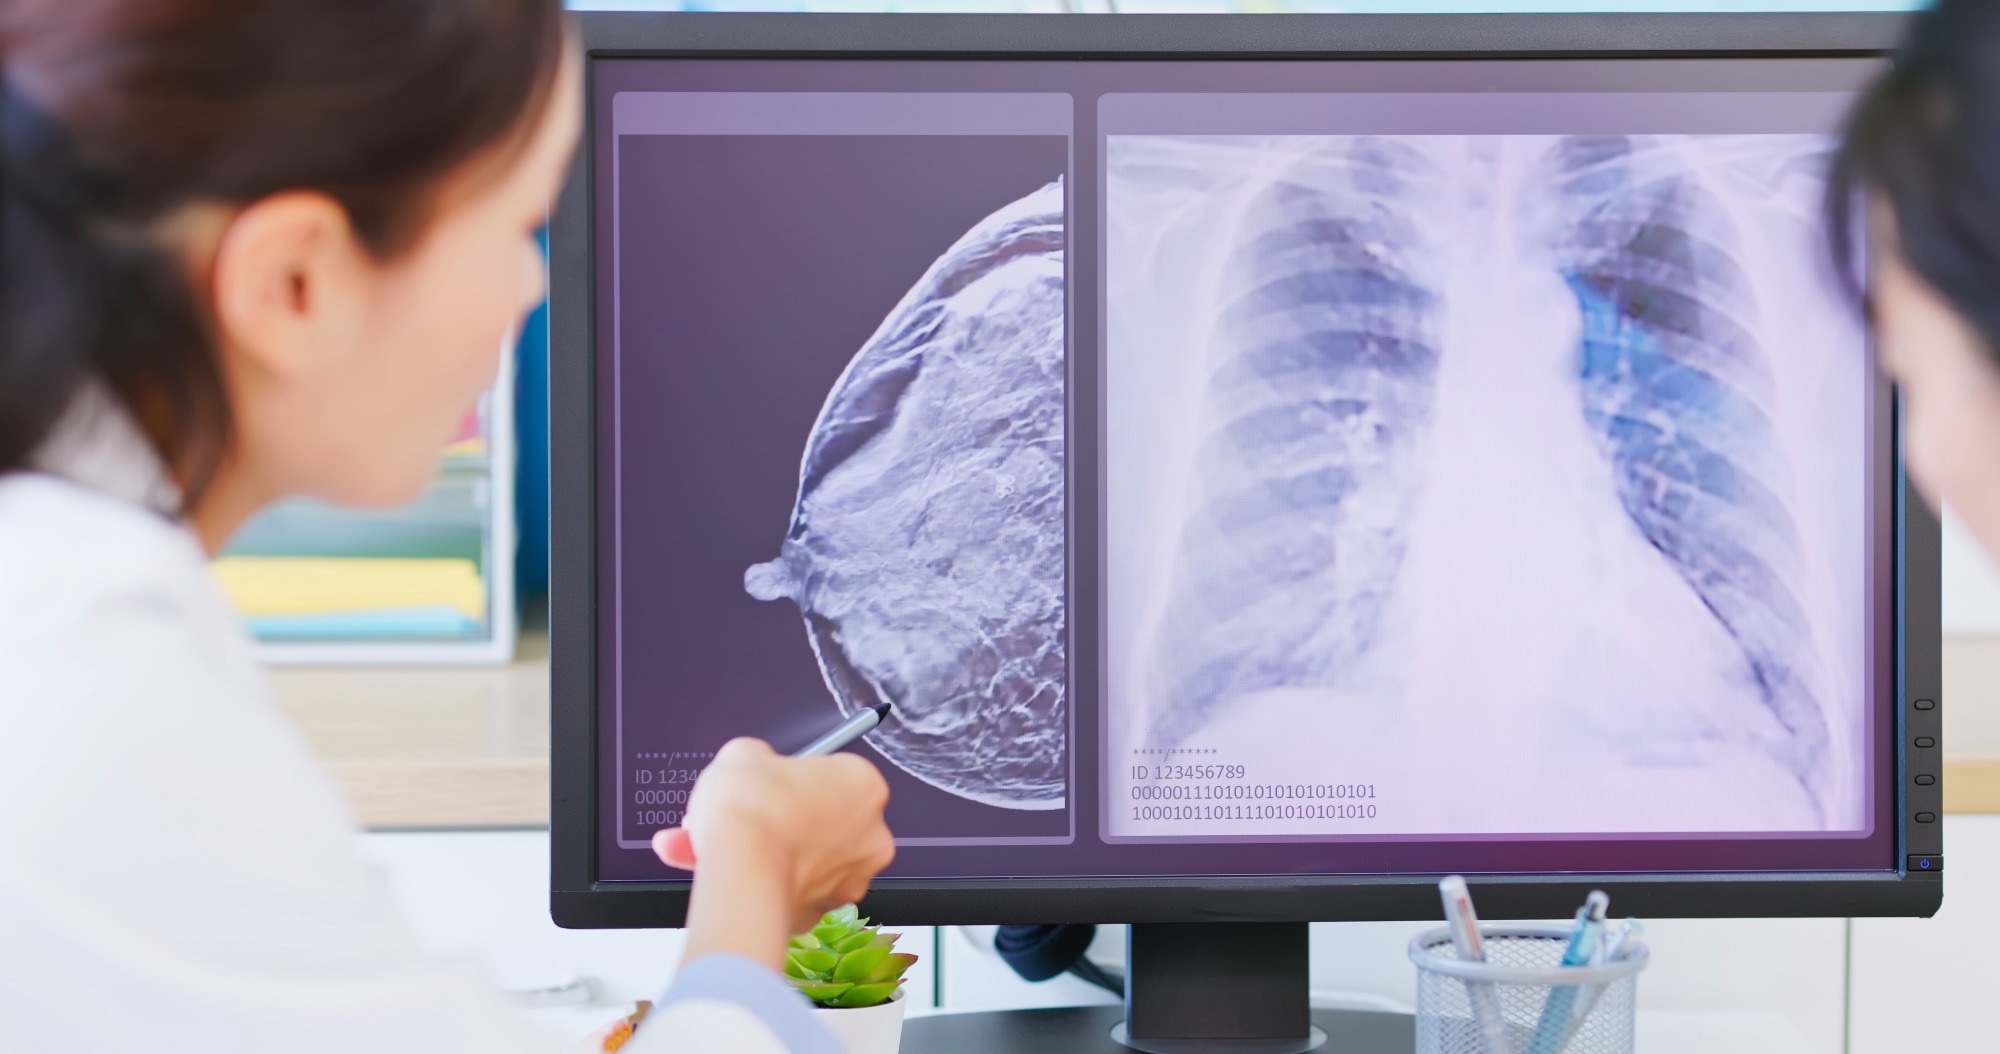 Study: Combining machine learning with Cox models to identify predictors for incident post-menopausal breast cancer in the UK Biobank. Image Credit: aslysun / Shutterstock.com